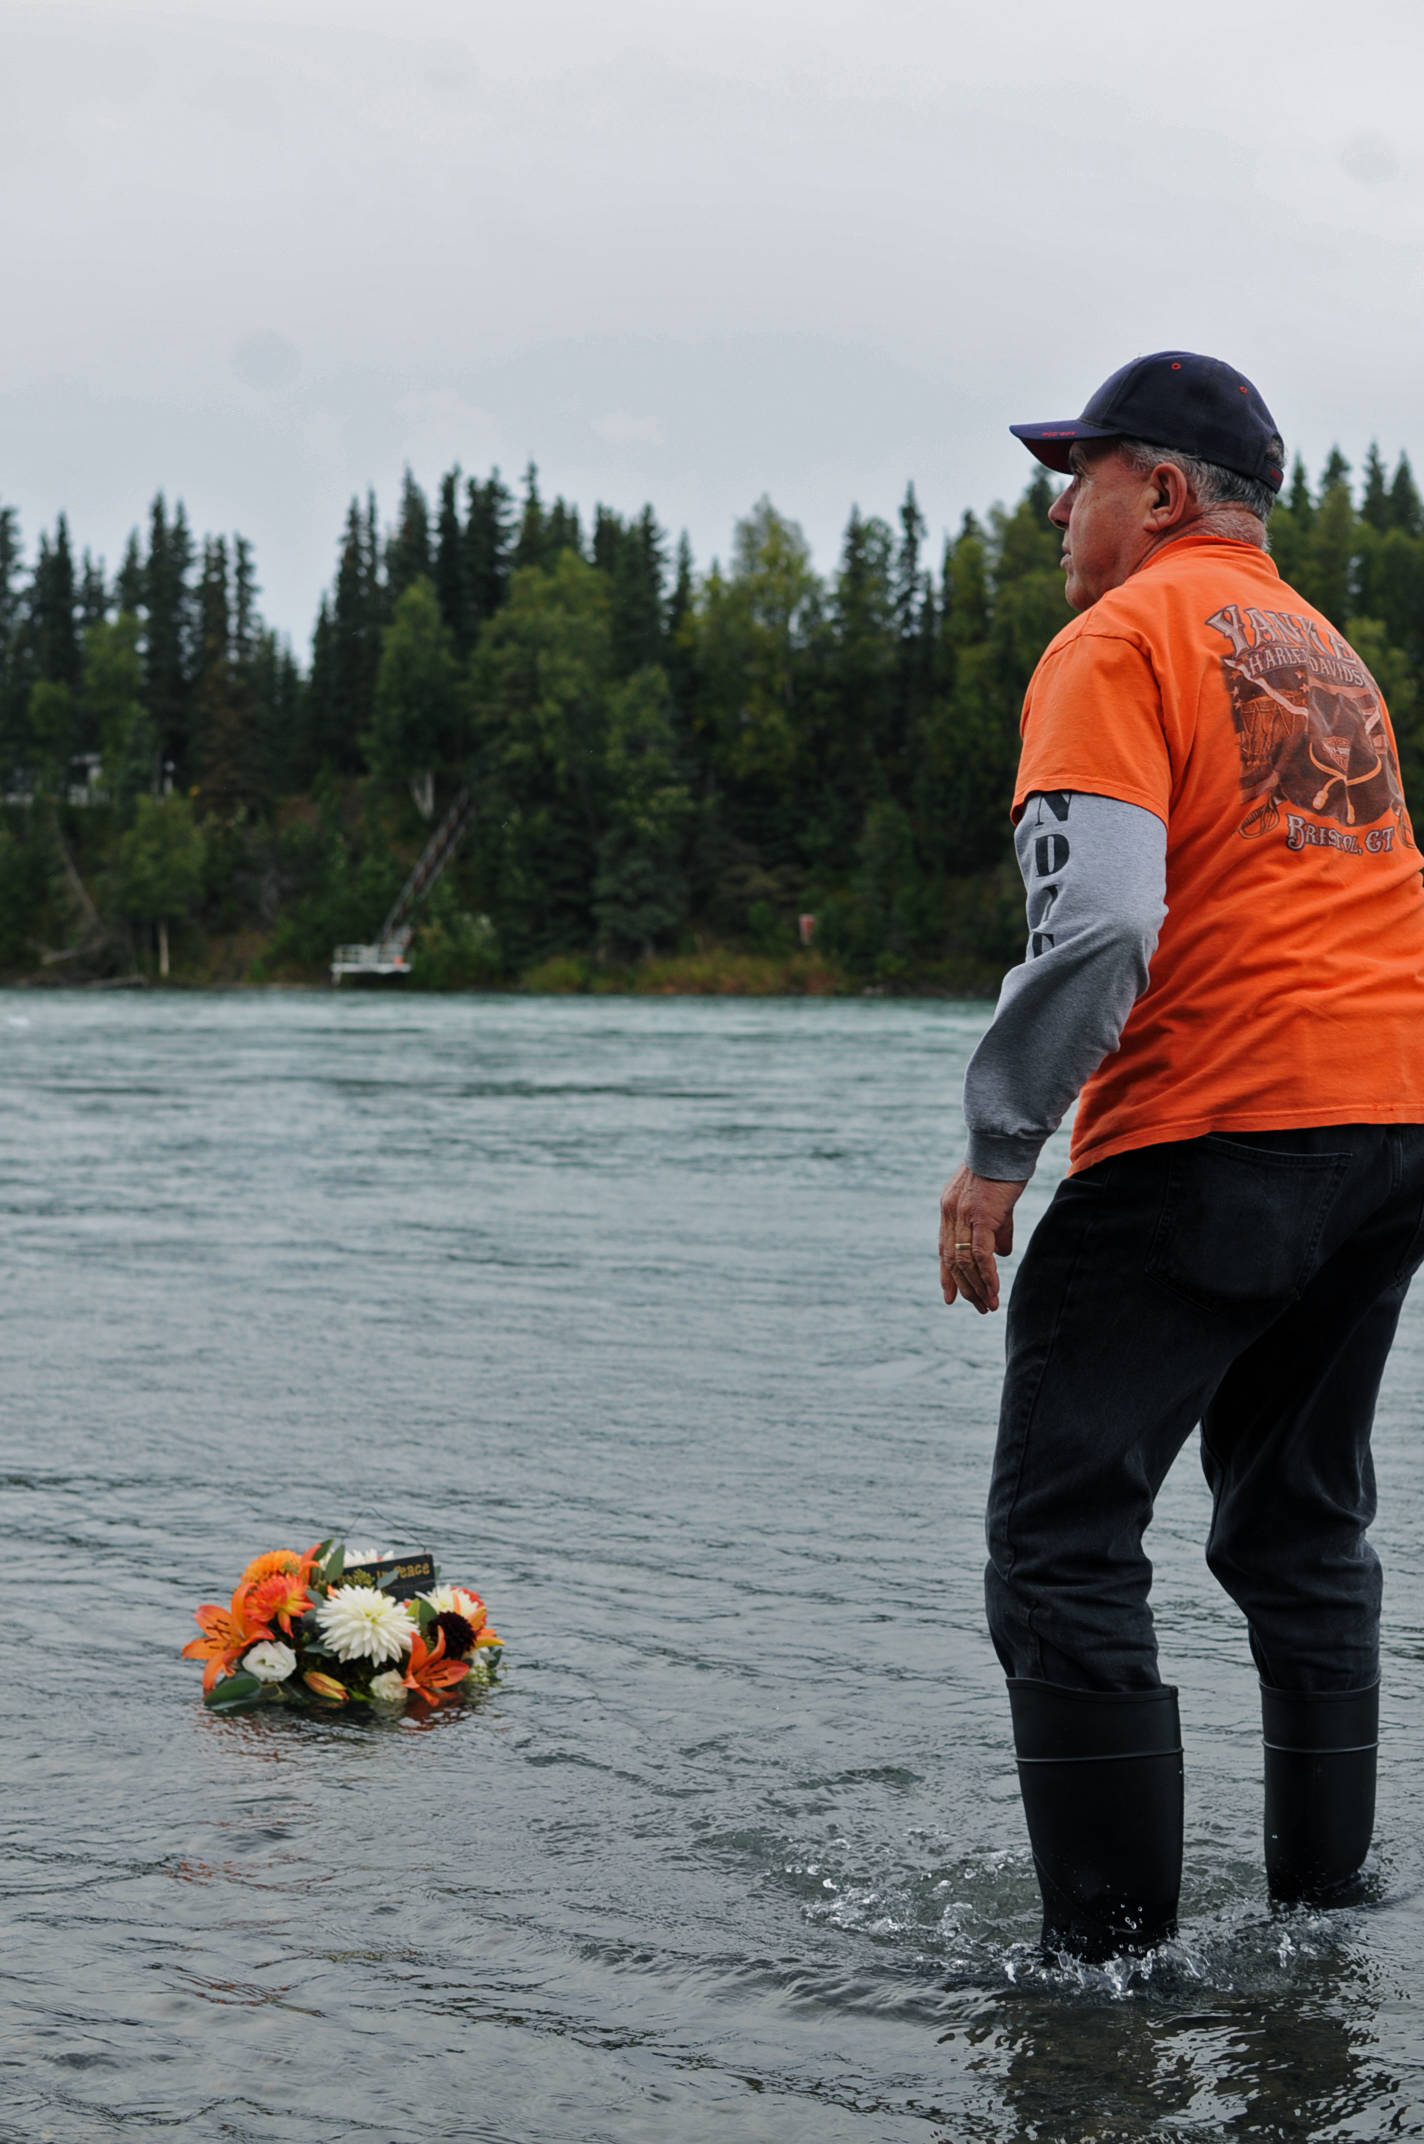 Paul Montenieri, the founder of the Soldotna senior softball league, releases a wreath in honor of Kurt Keltner on the Kenai River on Tuesday, Aug. 29, 2017 in Soldotna, Alaska. Keltner, who lived in Sterling during the summers and Colorado in the winters, has been missing since Aug. 4, when he was thrown from a fishing boat due to a mechanical error near Centennial Park and was not able to swim to shore. (Photo by Elizabeth Earl/Peninsula Clarion)